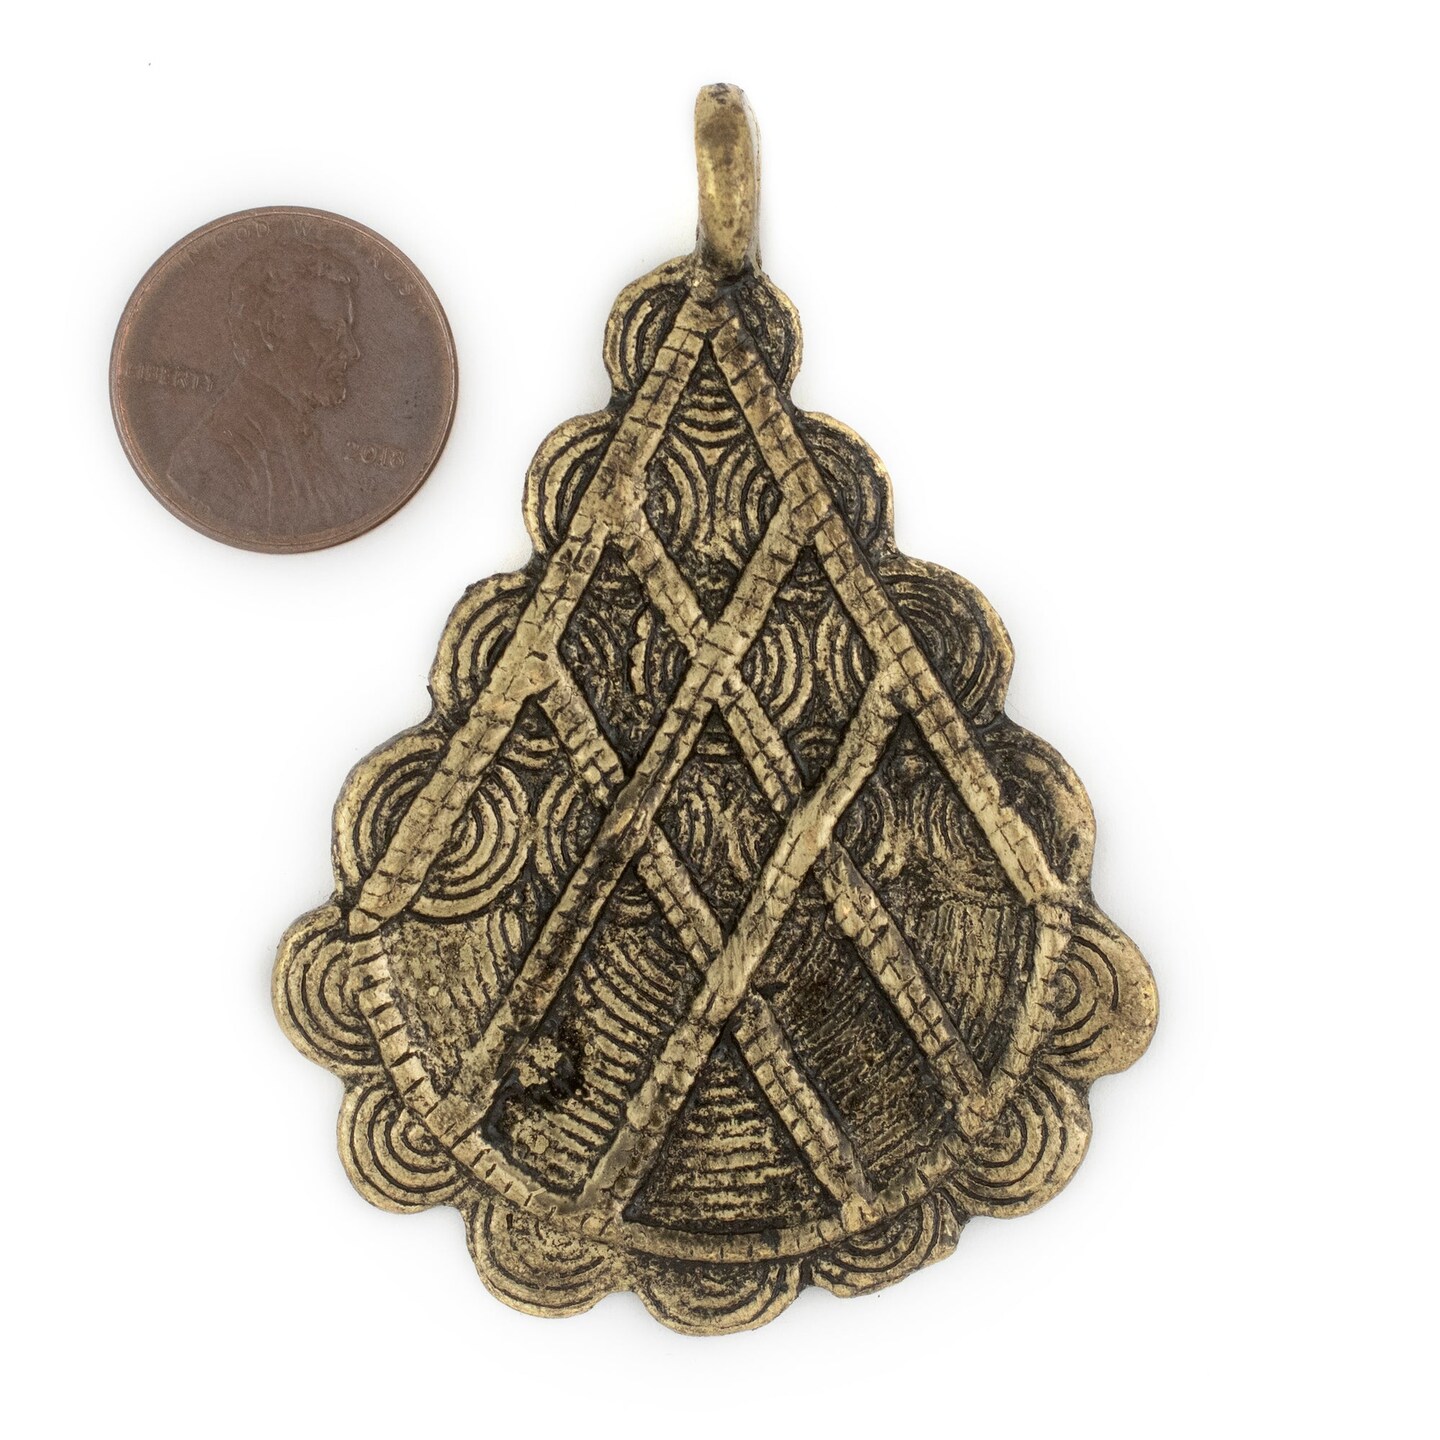 TheBeadChest Antiqued Brass Baule Pyramid Pendant 67x48mm Ivory Coast African Large Hole Handmade